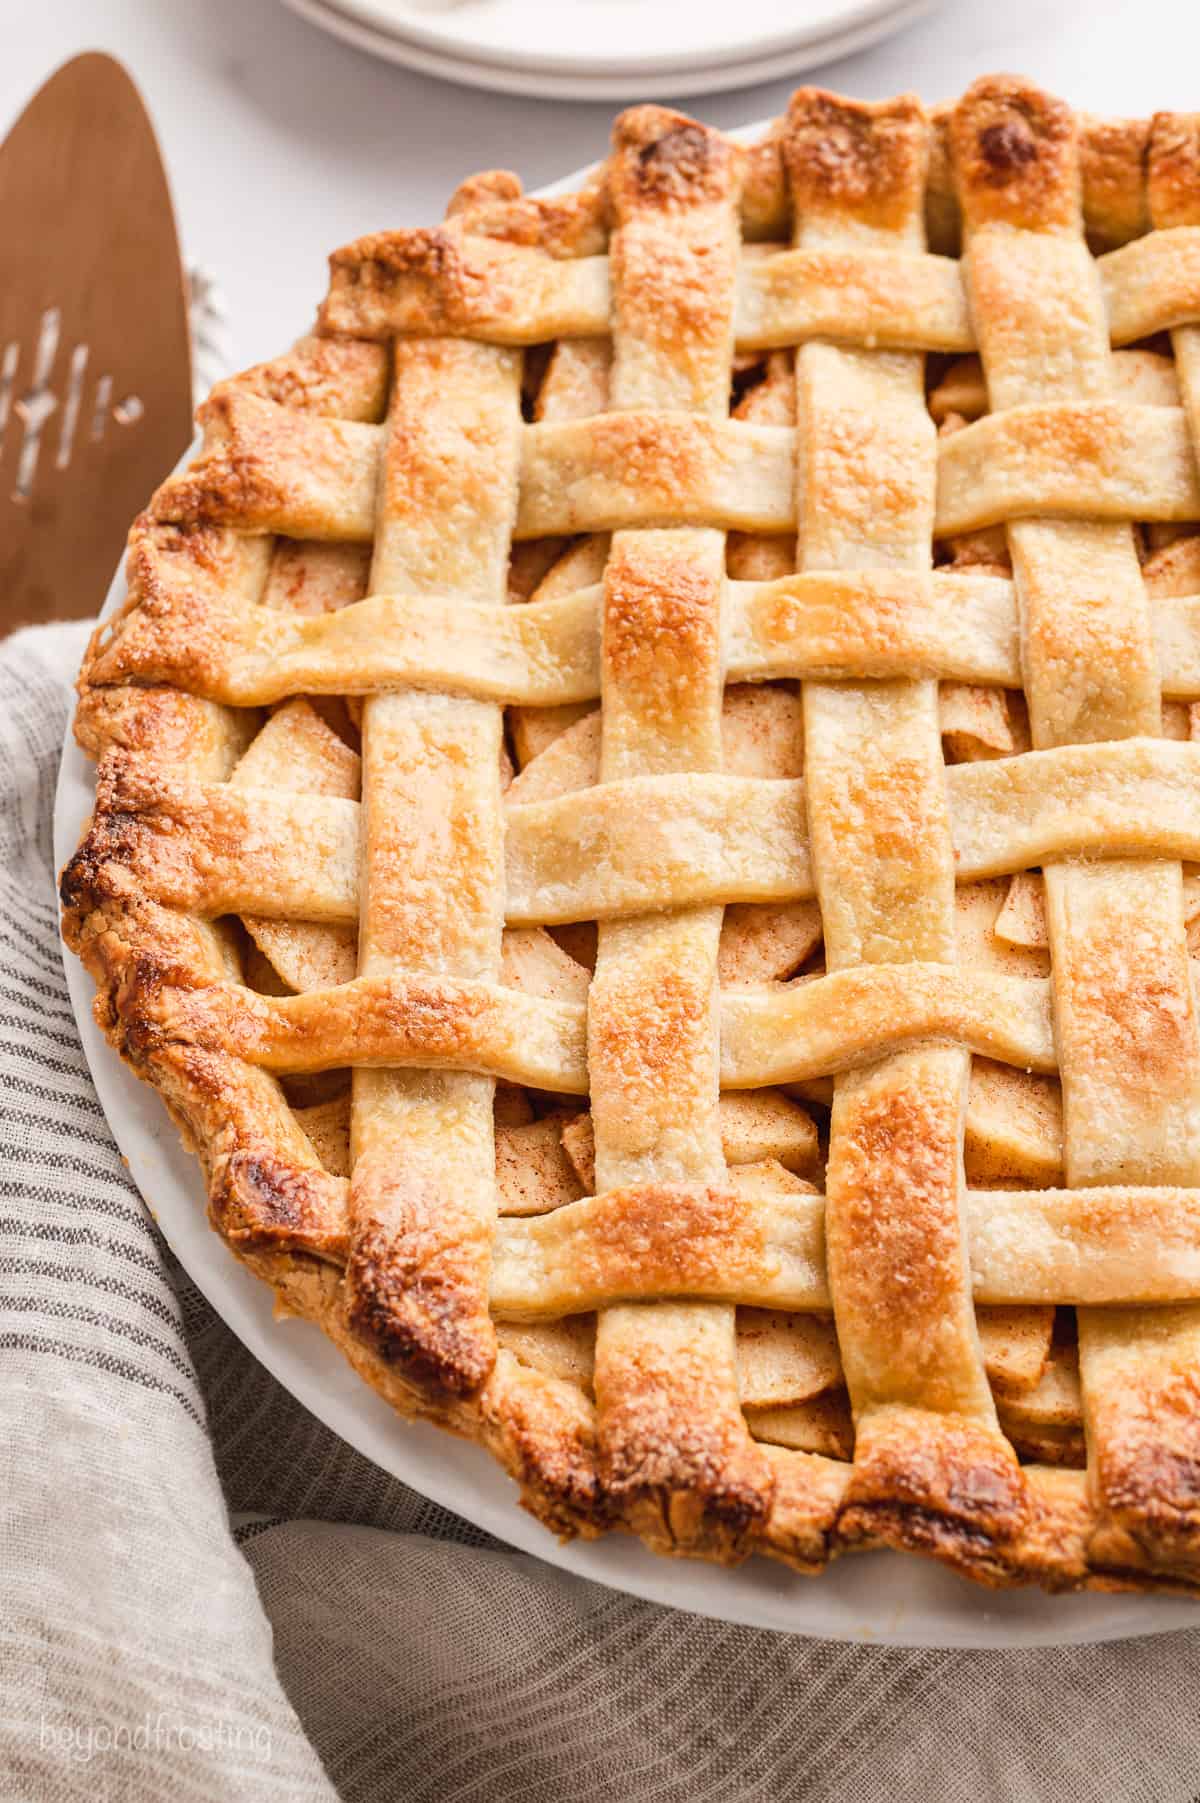 Close up of a baked pie with a lattice crust.